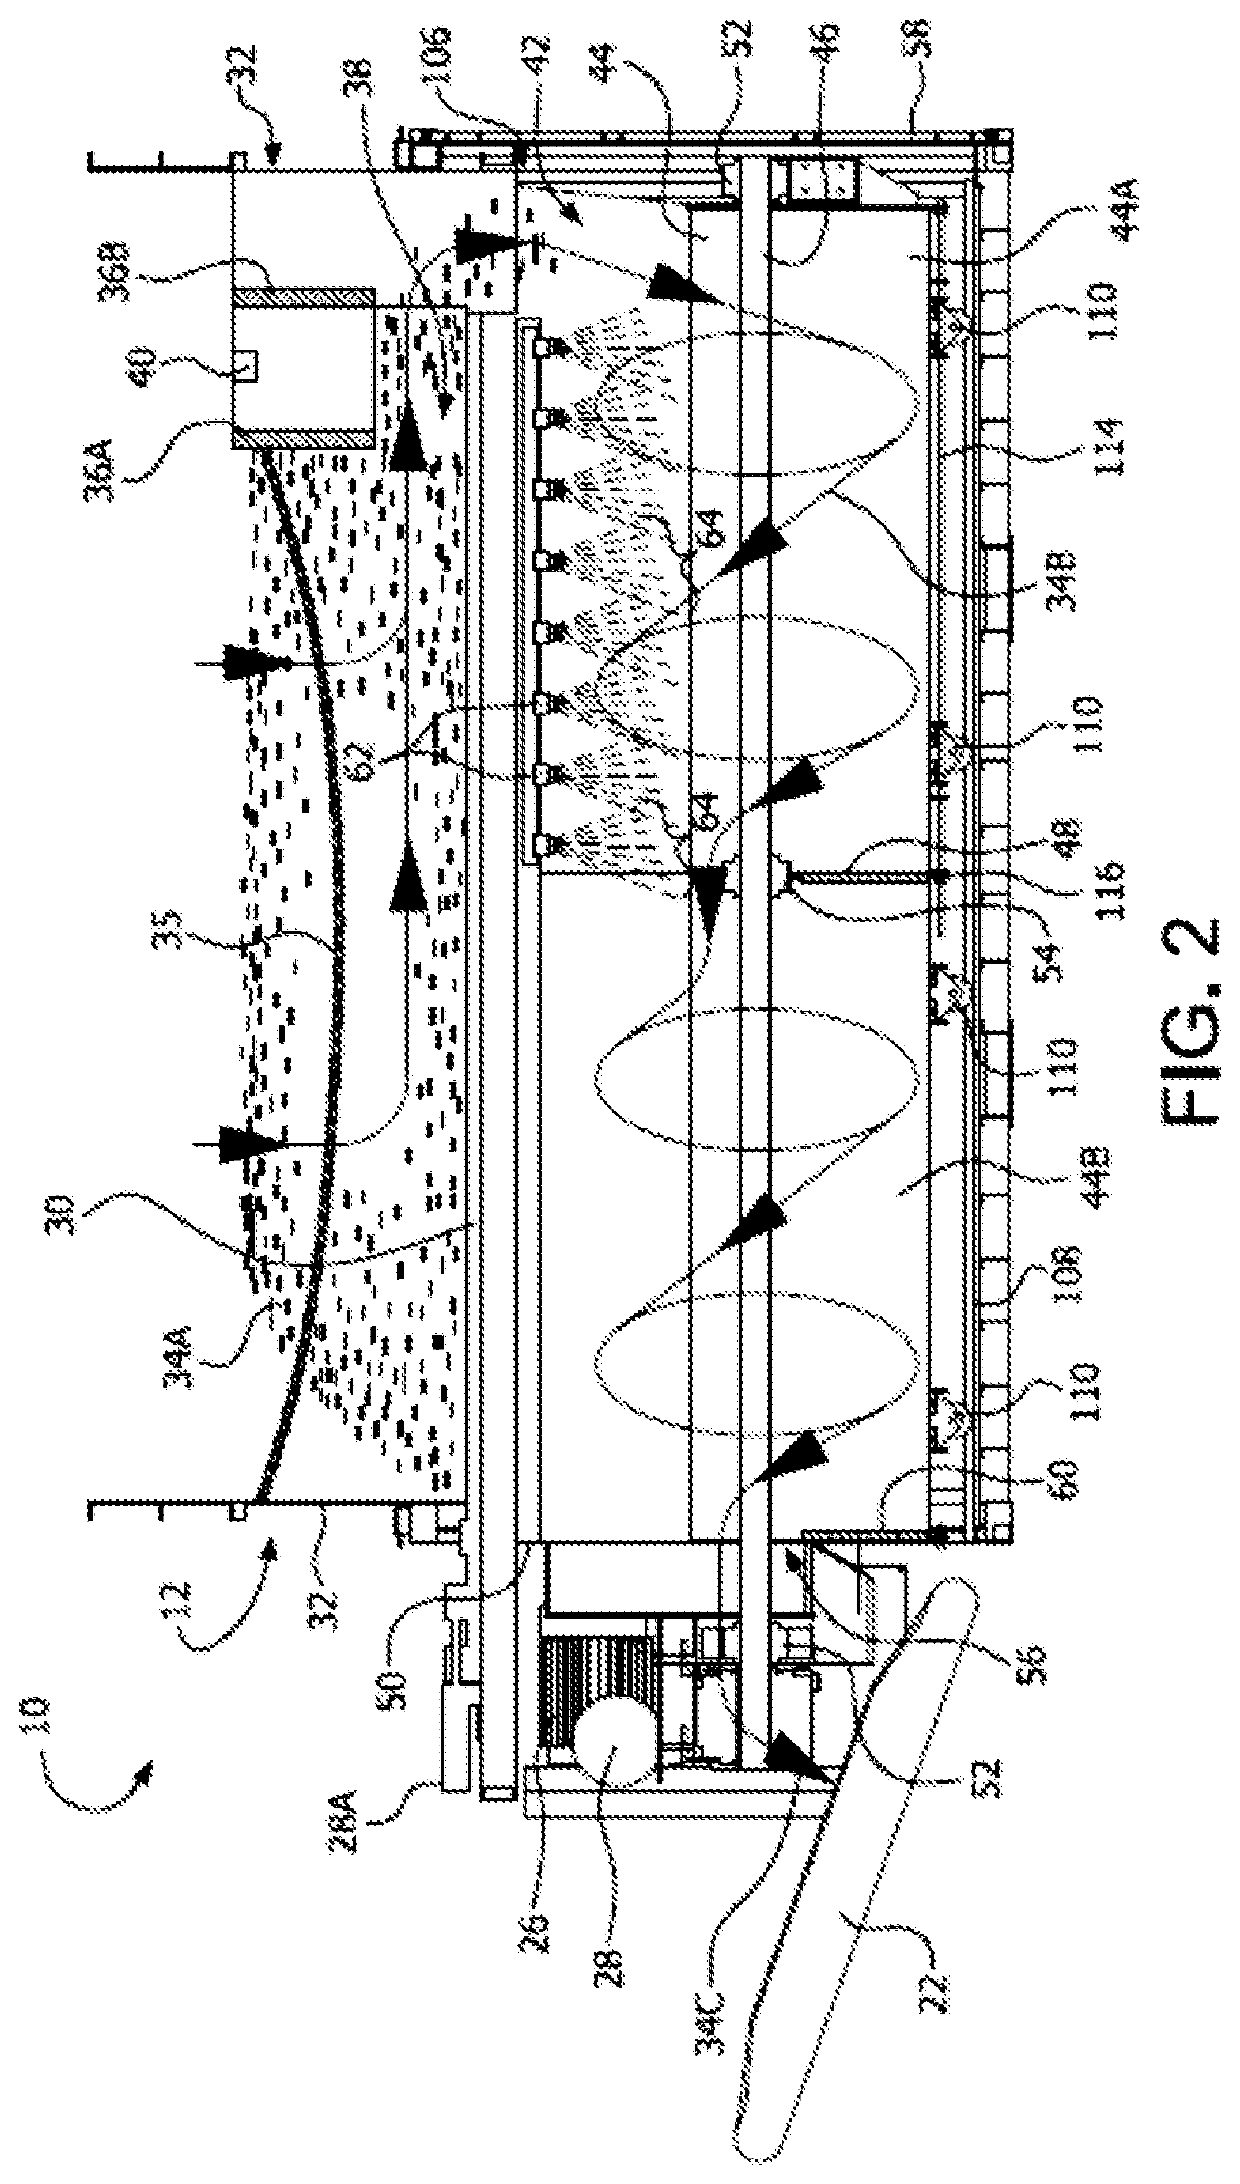 Functional treatment application to particulate materials such as mulch or potting soil